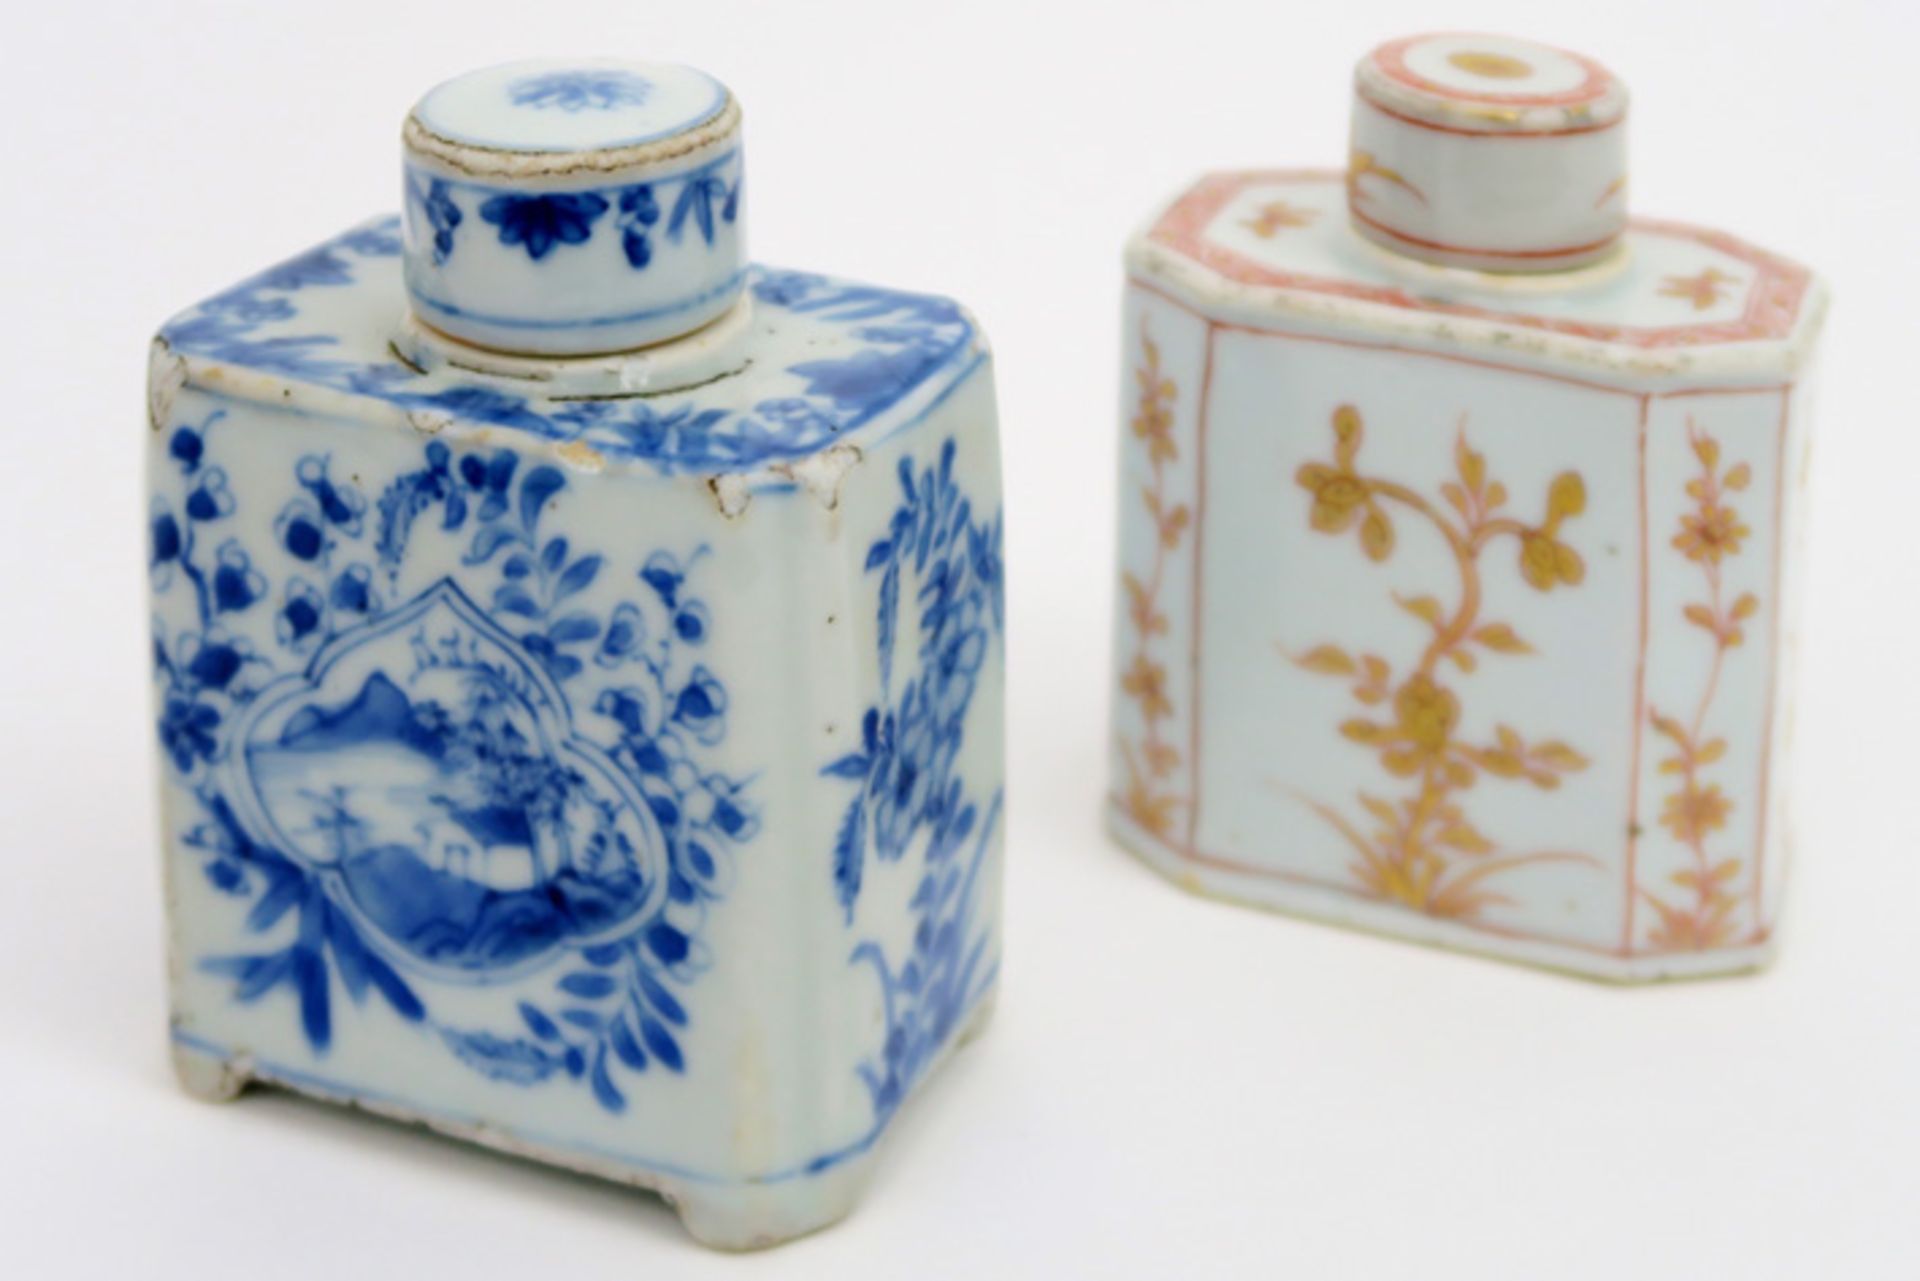 two 18th Cent. Chinese teacaddys in porcelain with flower decor , one in blue-white and one in - Image 3 of 5